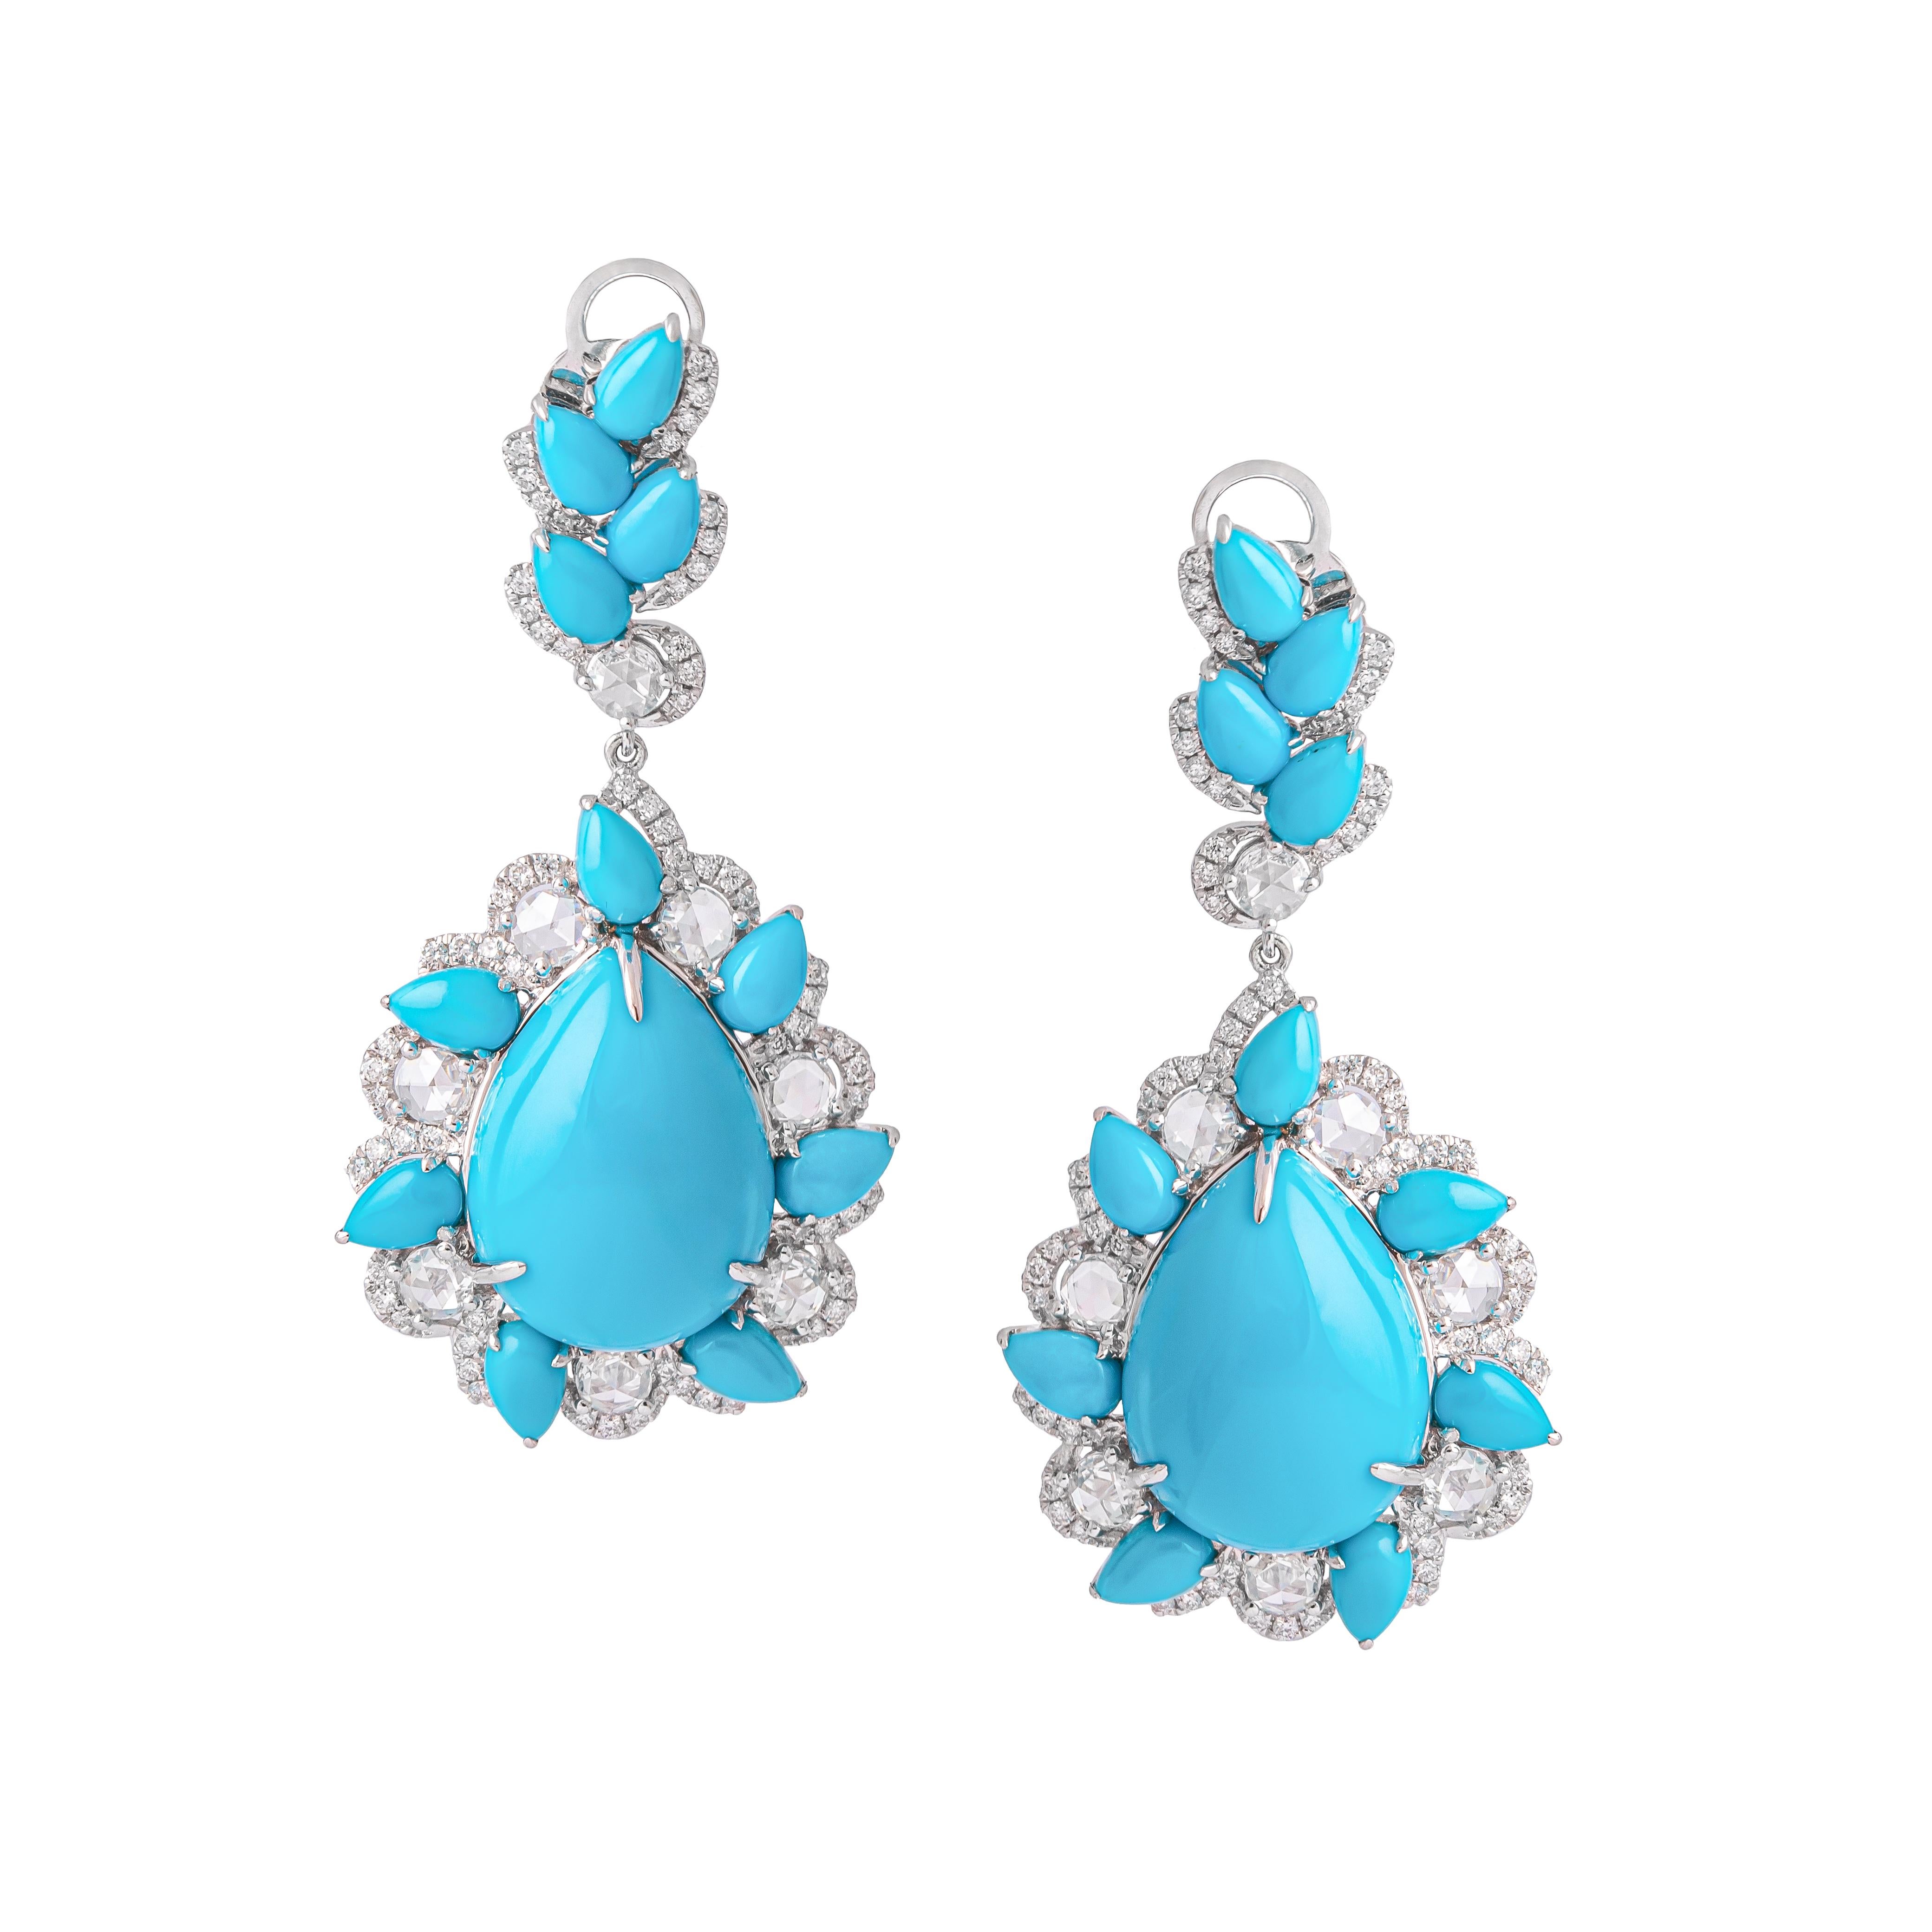 Pendant Earrings in white gold 18K rose cut 1.06 carat and round diamond 0.53 carat surrounding Turquoise cabochon pear shapes, total 17.94 carat.
Total weight: 14.84 grams.

Total length: 4.00 centimeters.